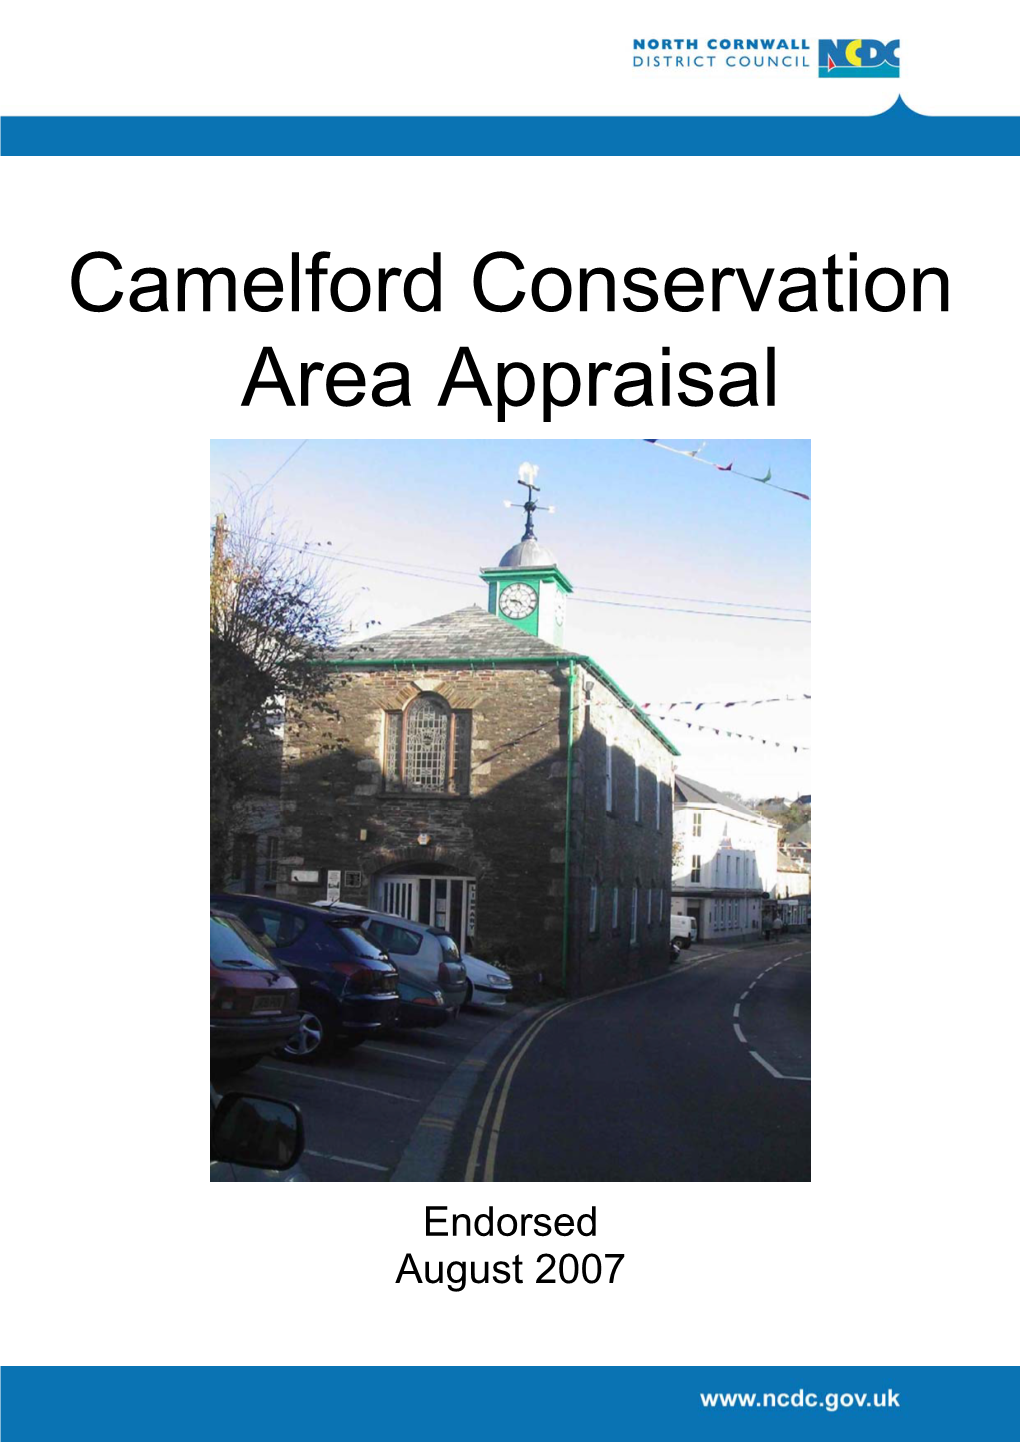 Camelford Conservation Area Appraisal